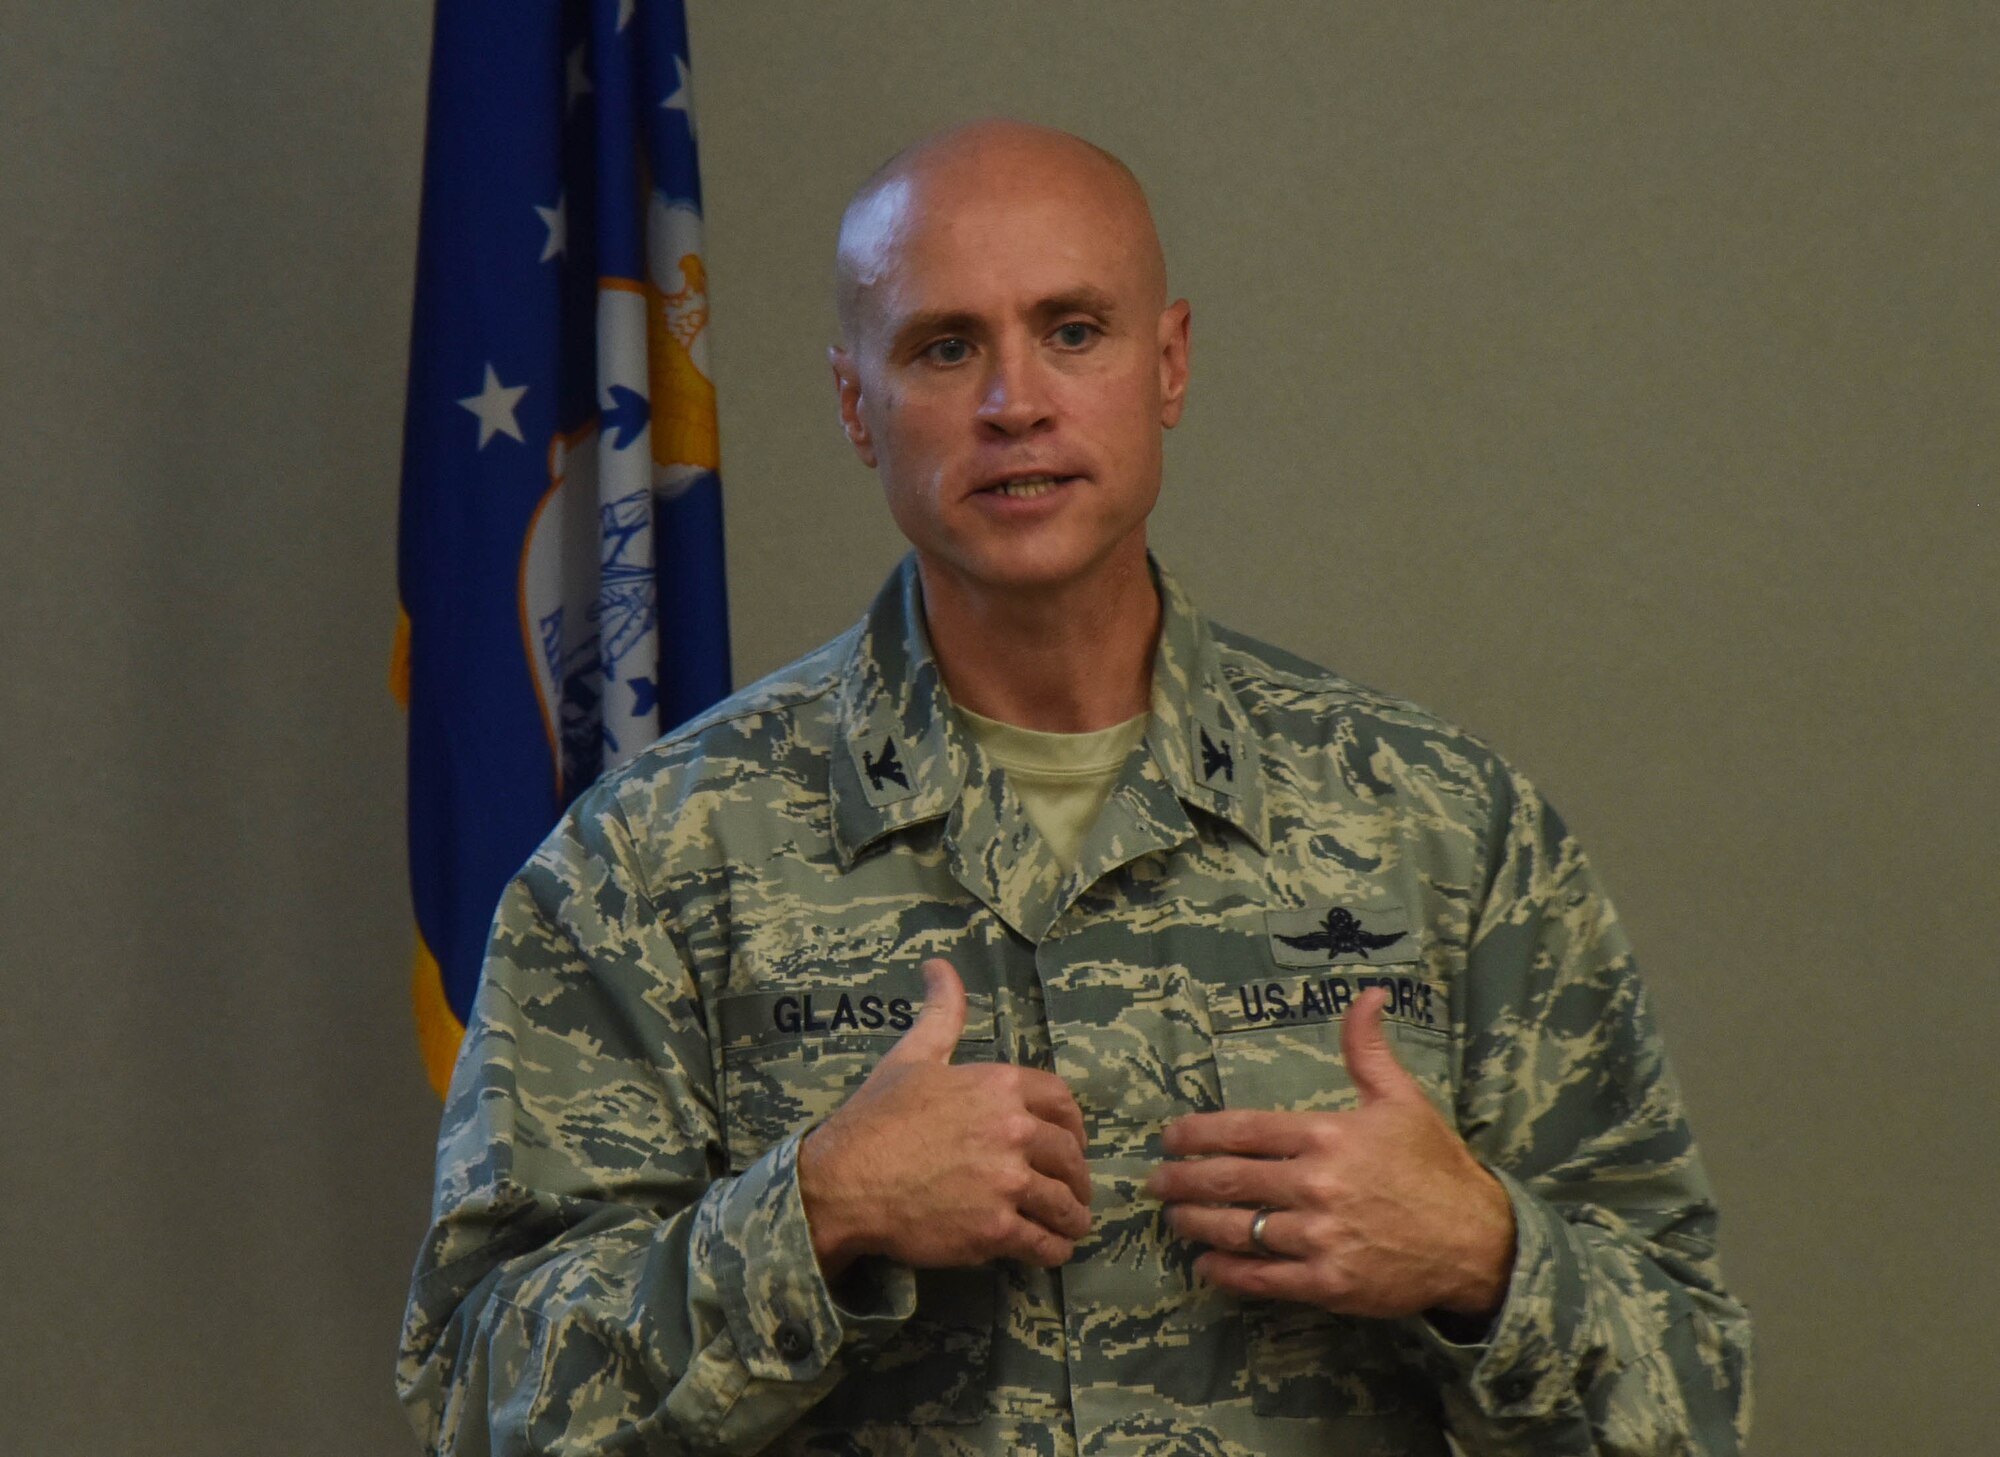 Col. Jason Glass, the Assistant Adjutant General of Tennessee for Air, conducted an air commanders workshop at the 118th Wing in Nashville, Tenn. on July 18, 2018.